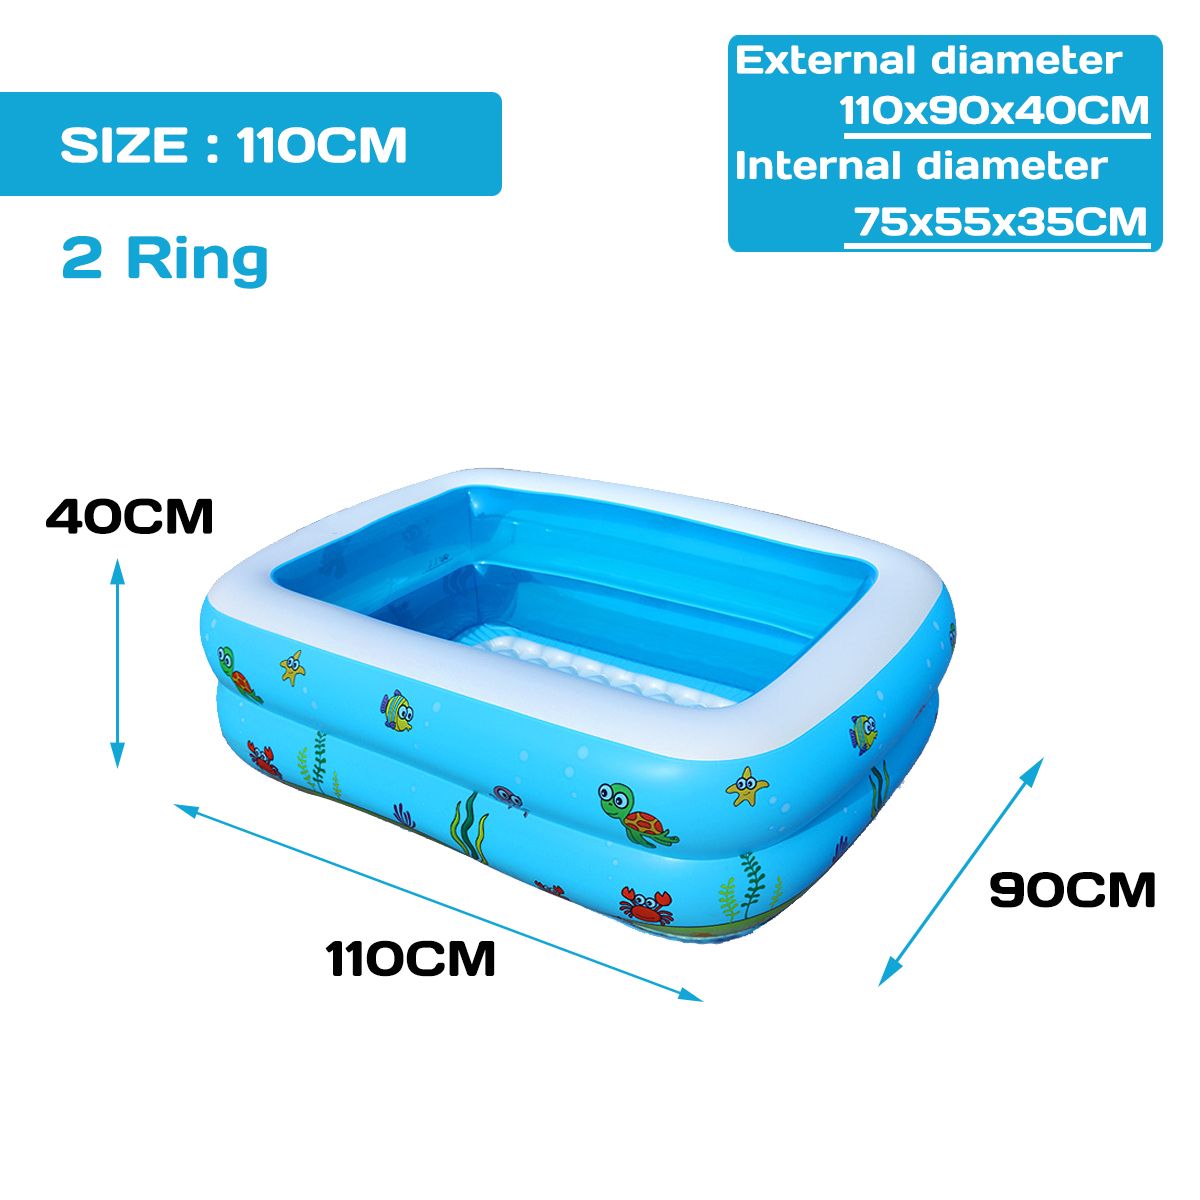 Children-Inflatable-Pool-Bathtub-Thickened-Bubble-Bottom-Wear-Resistant-Baby-Adult-Home-Paddling-Poo-1708468